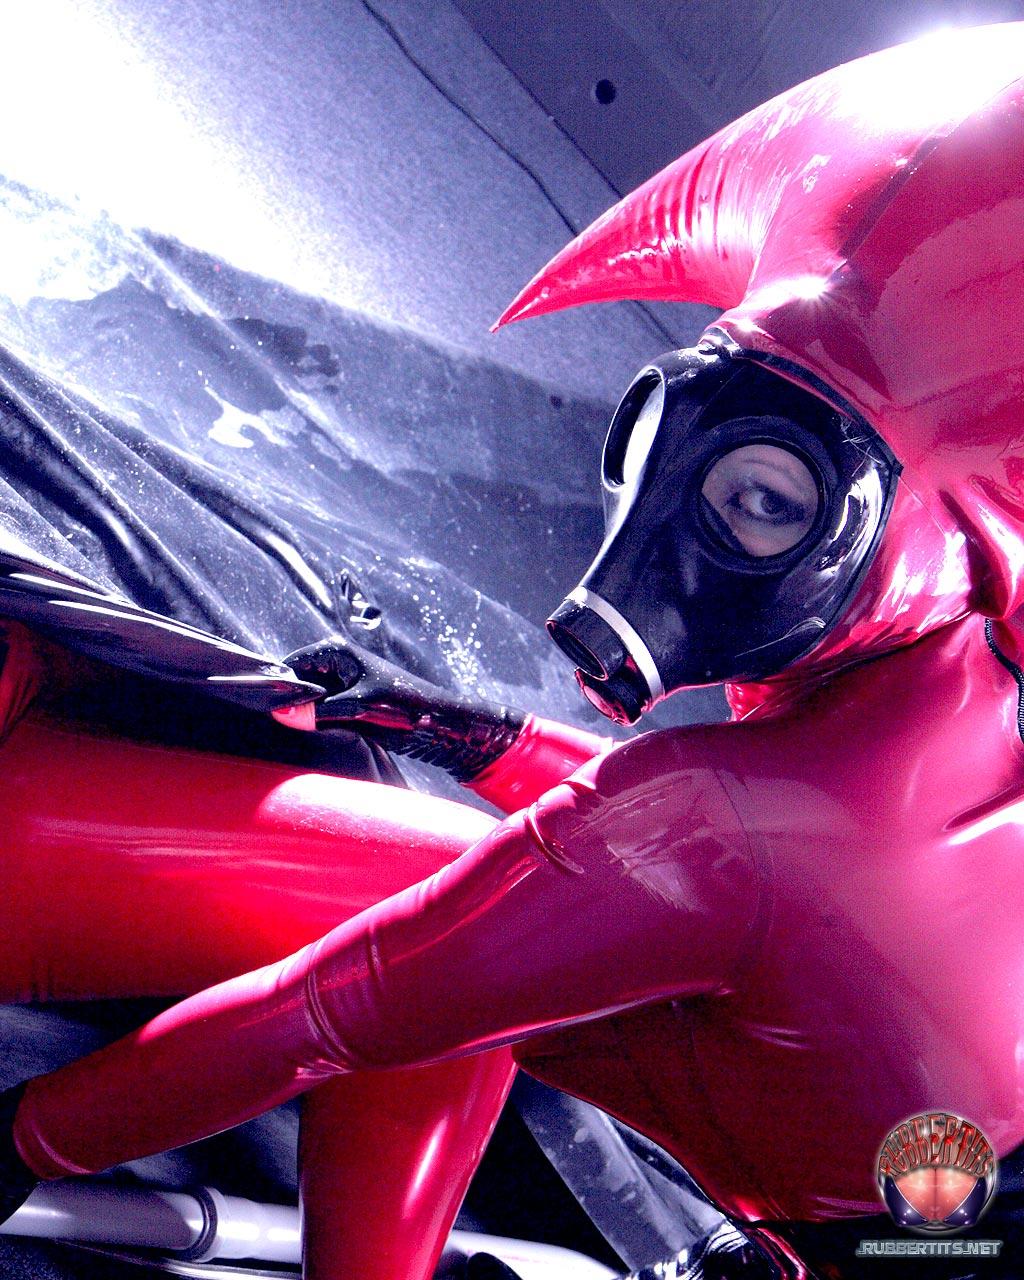 Lesbians Darkwing Zero & Lady Cassandra wear latex costumes during SFW play foto porno #422975565 | Rubber Tits Pics, Darkwing Zero, Lady Cassandra, Latex, porno móvil